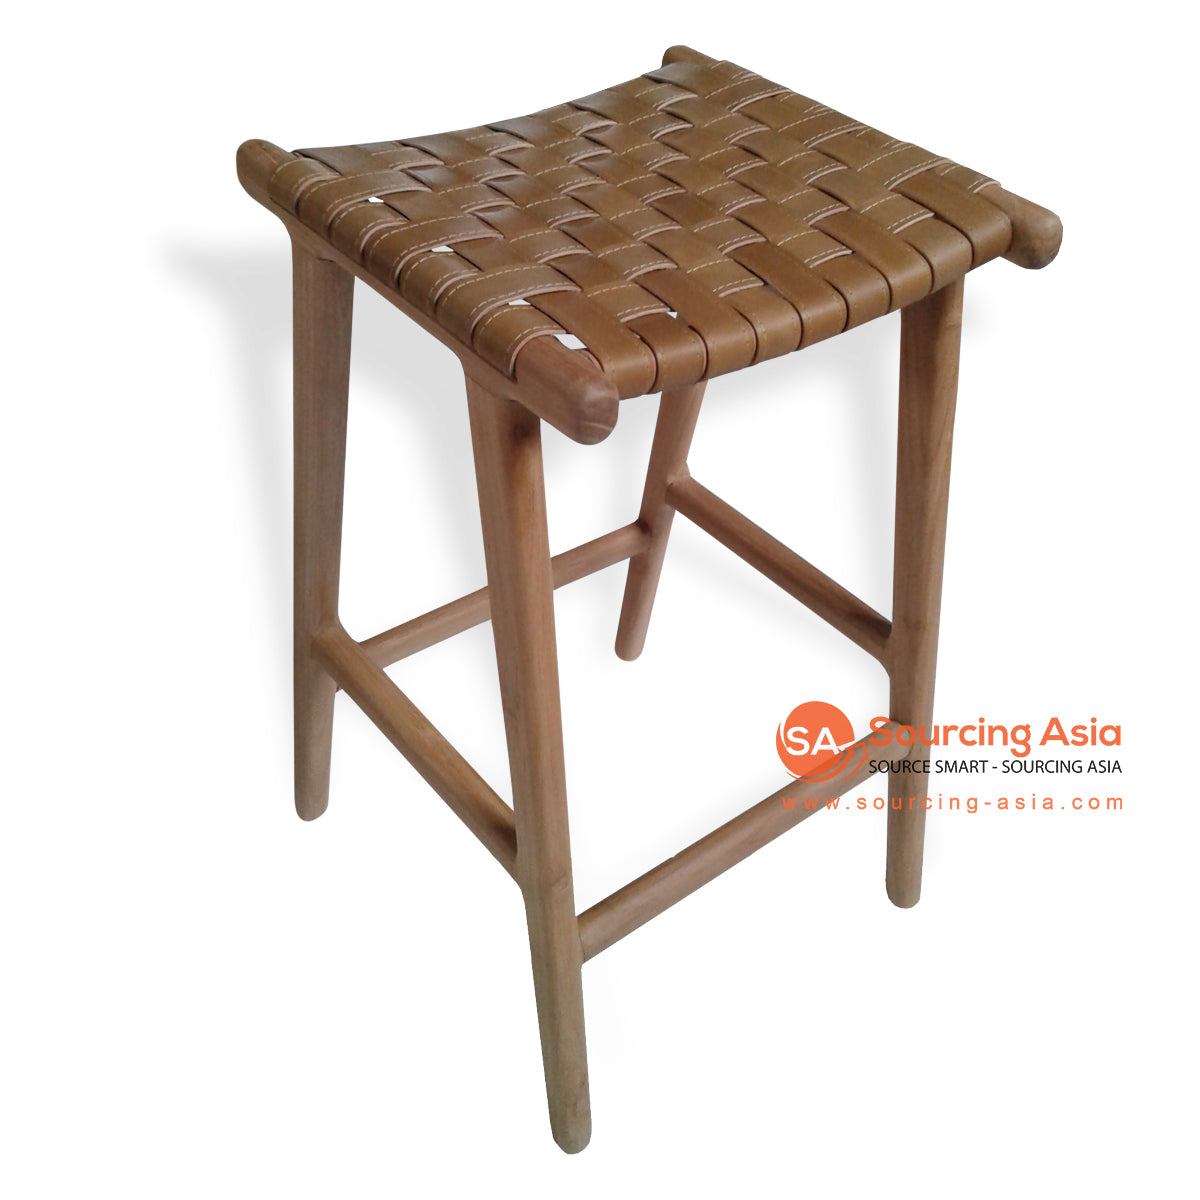 KUSJ016-65A WALNUT WOVEN LEATHER AND NATURAL TEAK WOOD SQUARE BAR STOOL